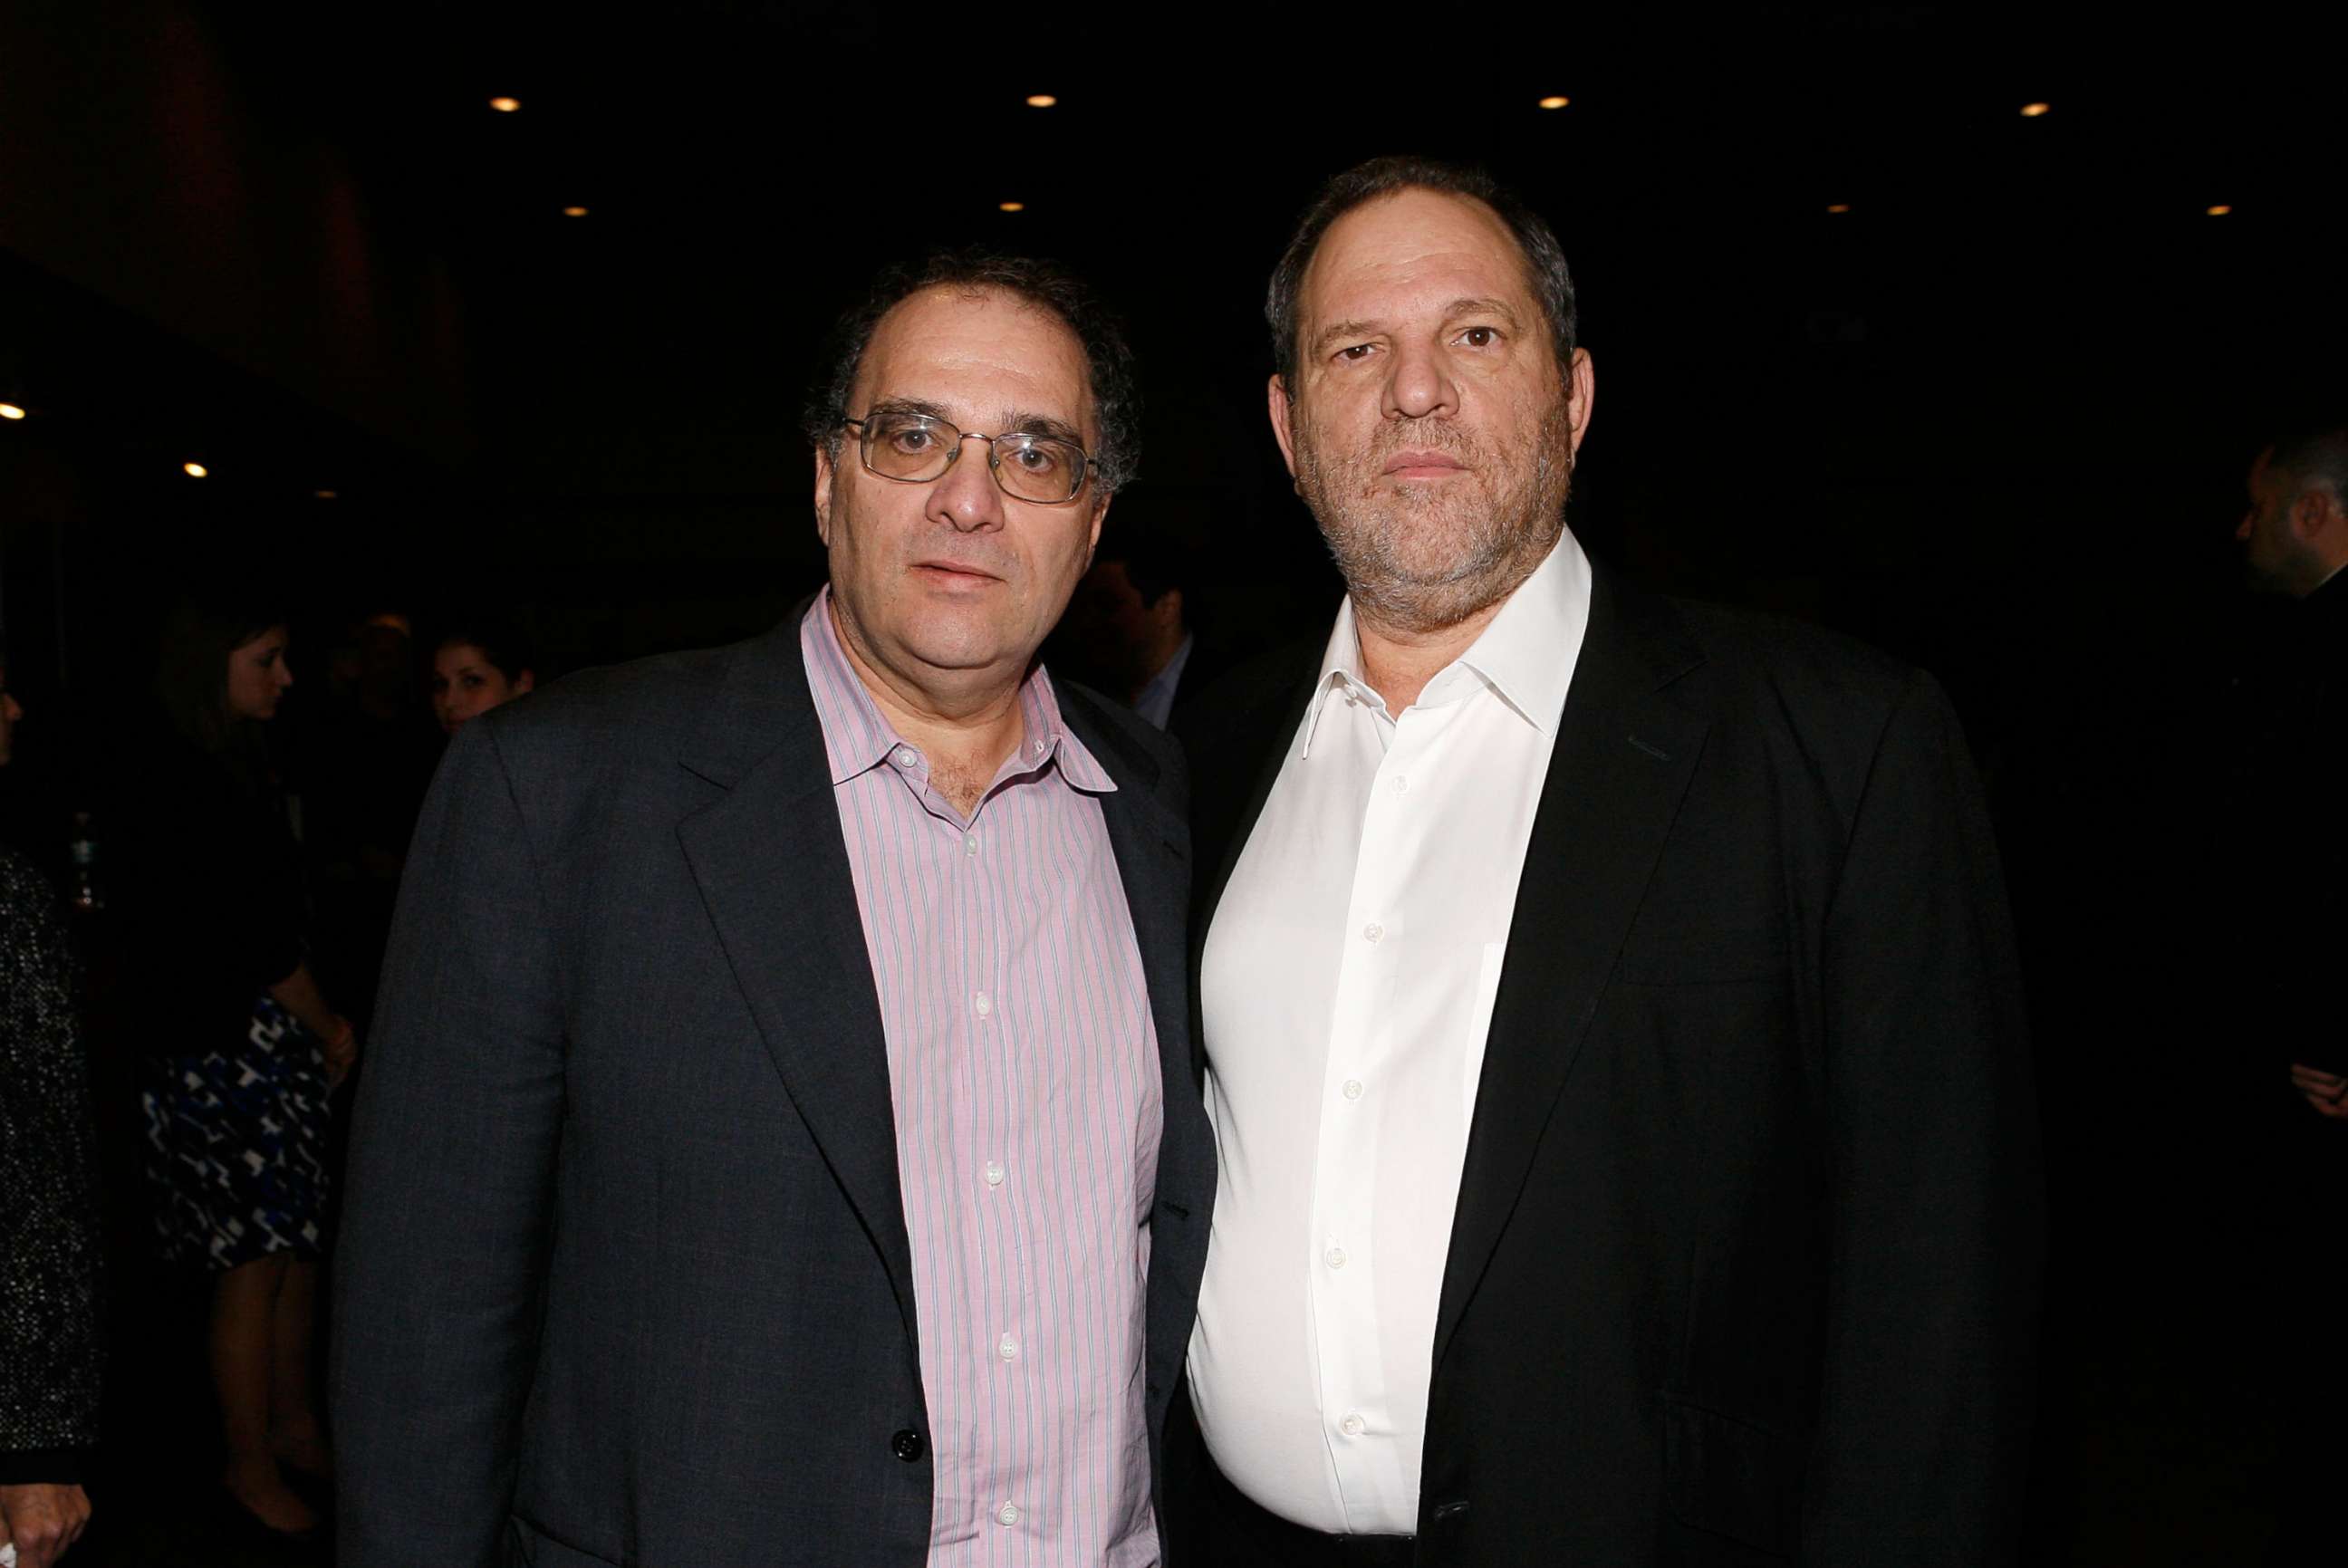 PHOTO: Bob Weinstein and Harvey Weinstein attend the New York premiere of Dimension Films' 'The Road' at Clearview Chelsea Cinemas, Nov. 16, 2009, in New York.